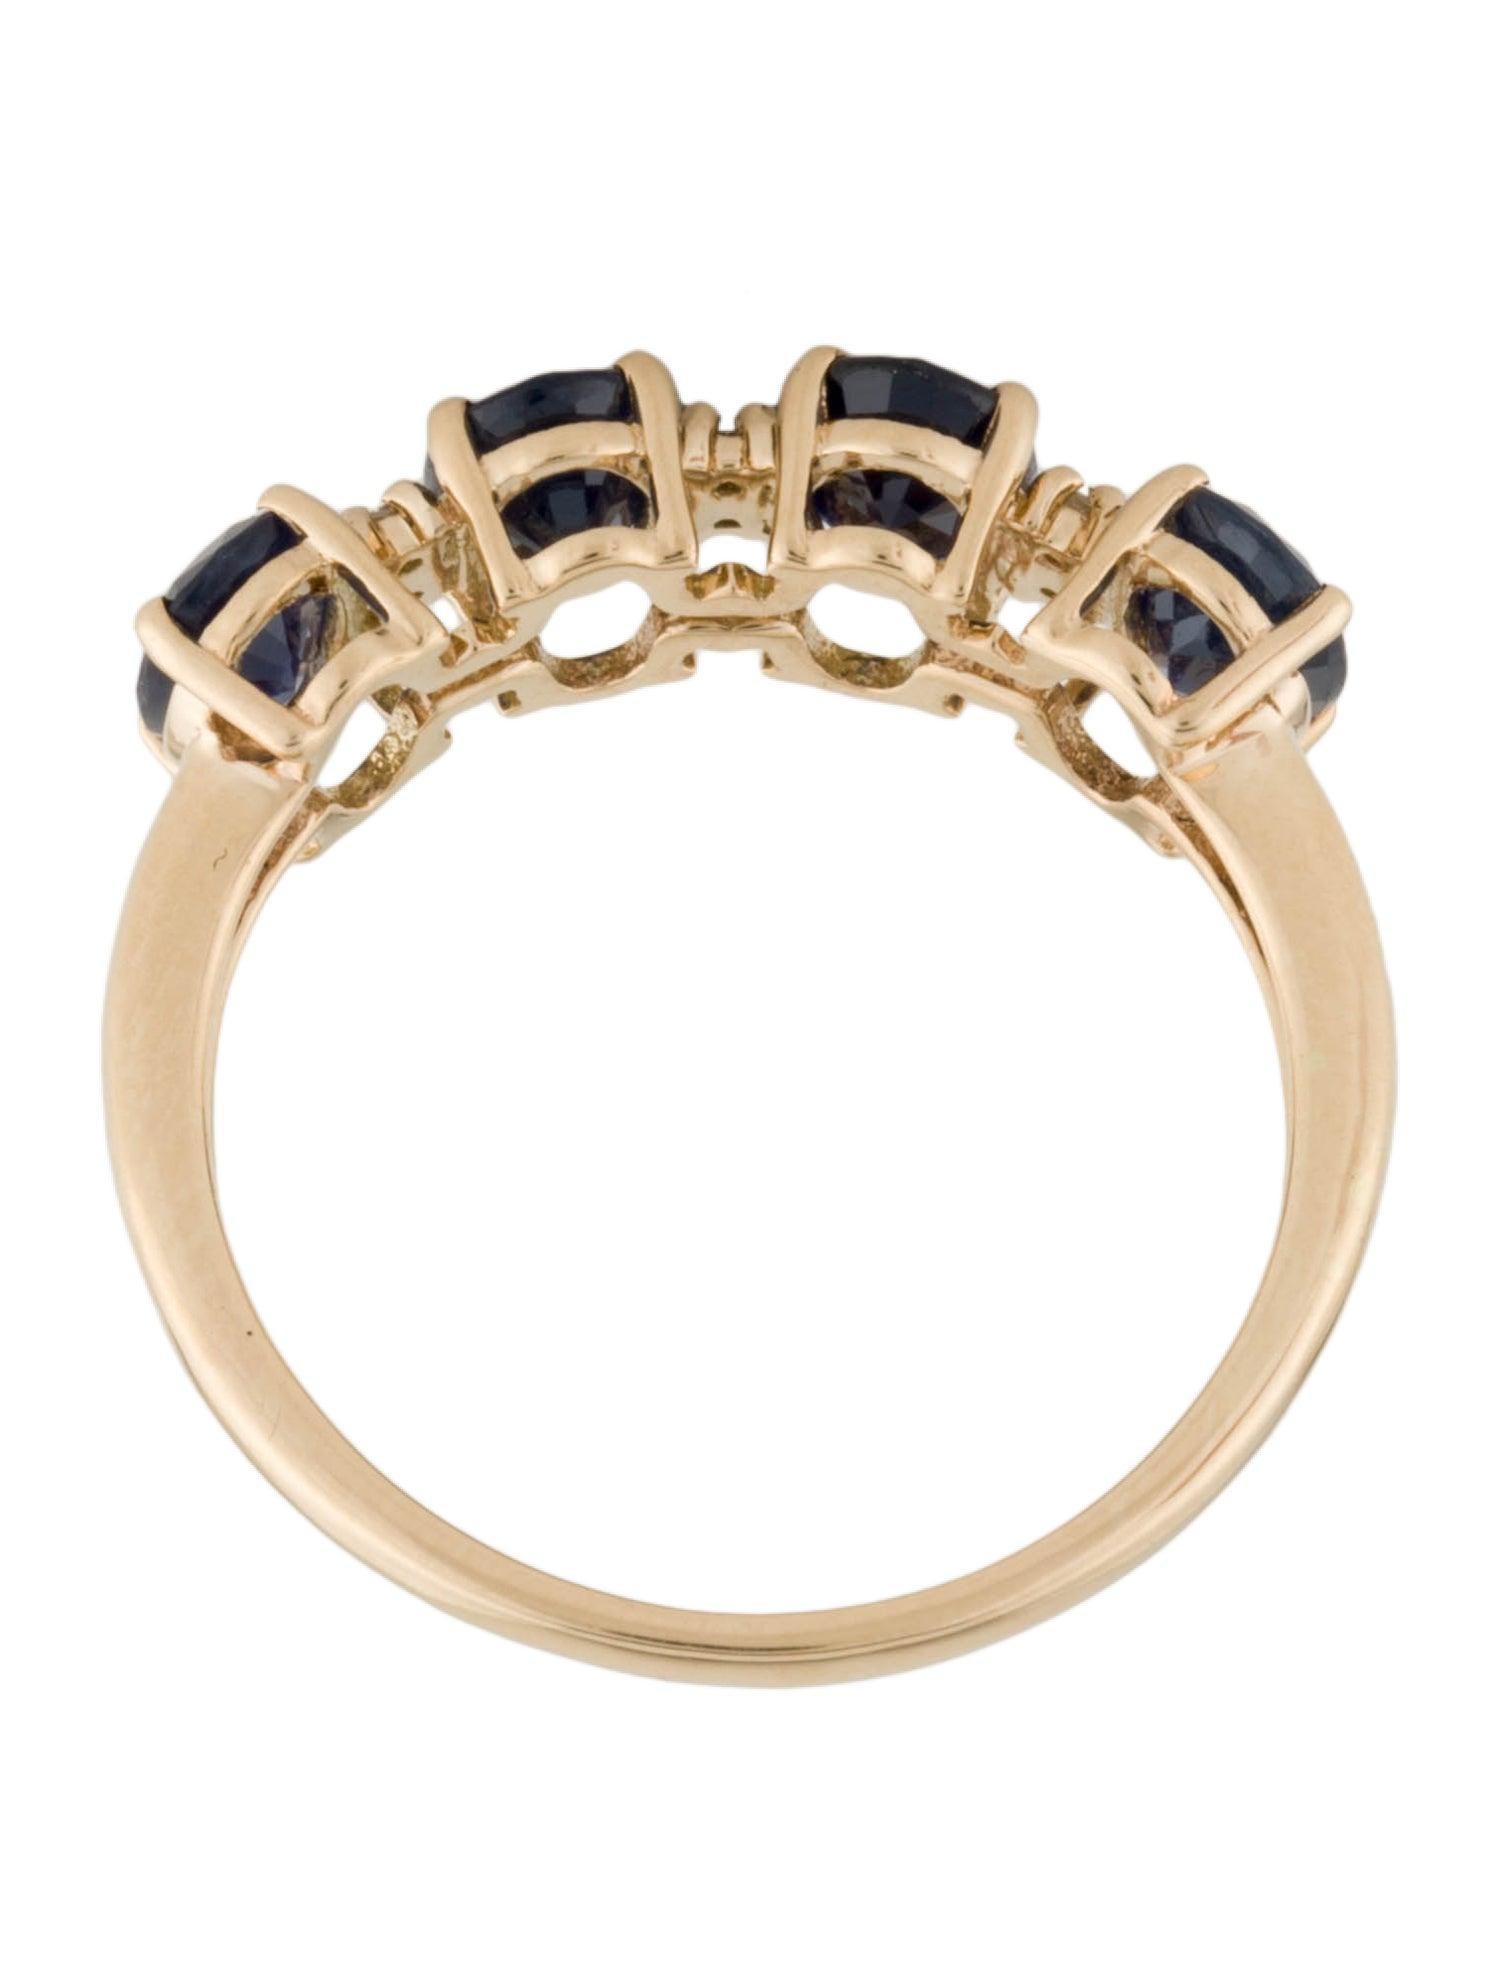 Luxurious 14K Gold Sapphire & Diamond Cocktail Ring - Size 6.75 - Fine Jewelry In New Condition For Sale In Holtsville, NY